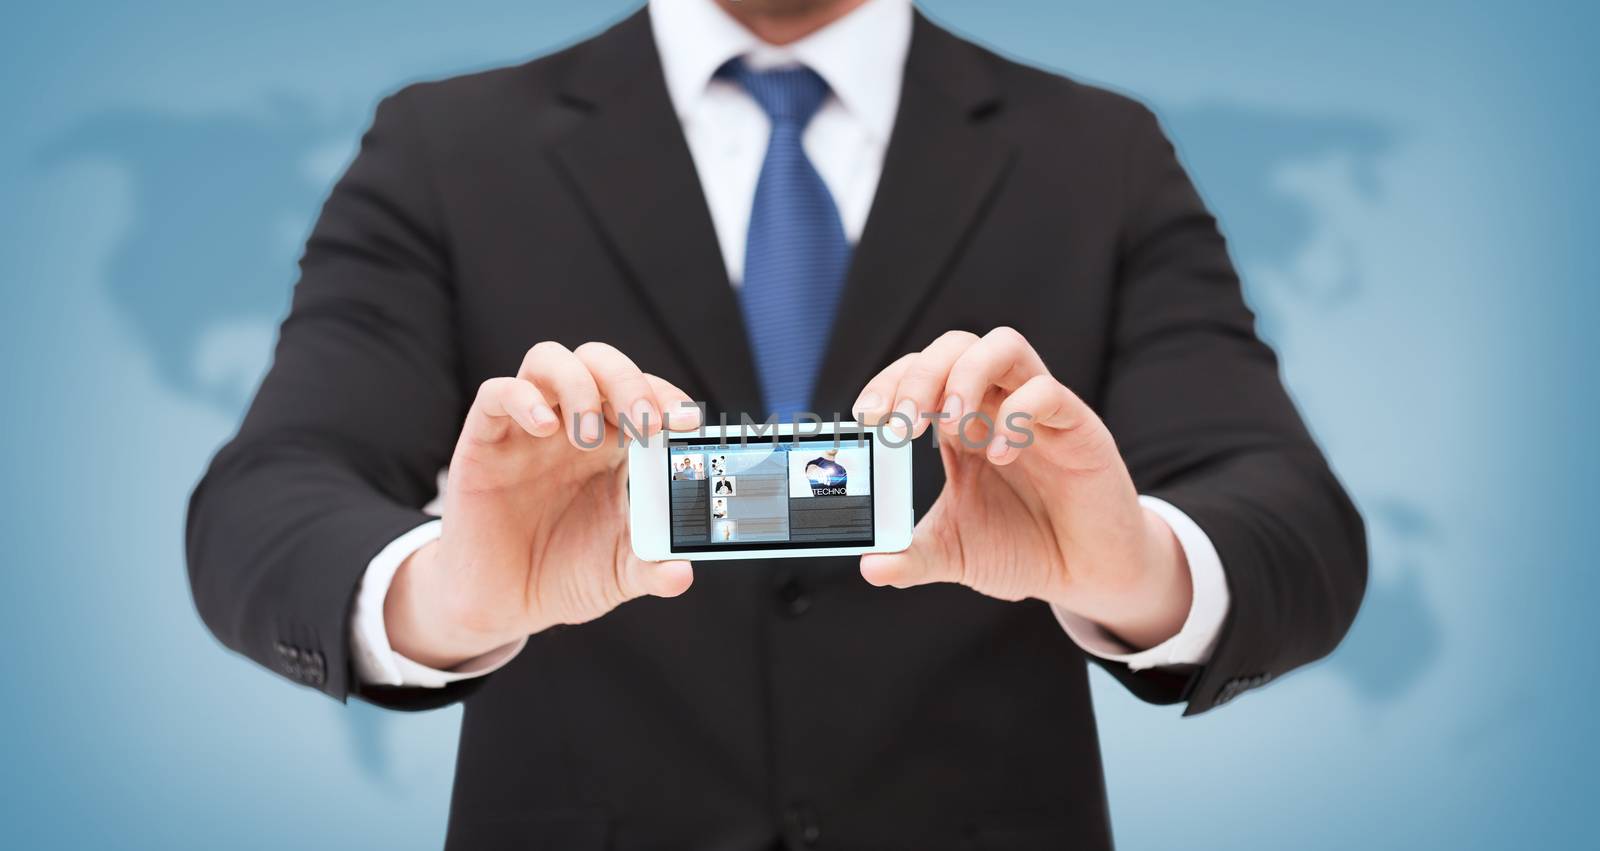 business, internet and technology concept - businessman showing smartphone with news on screen